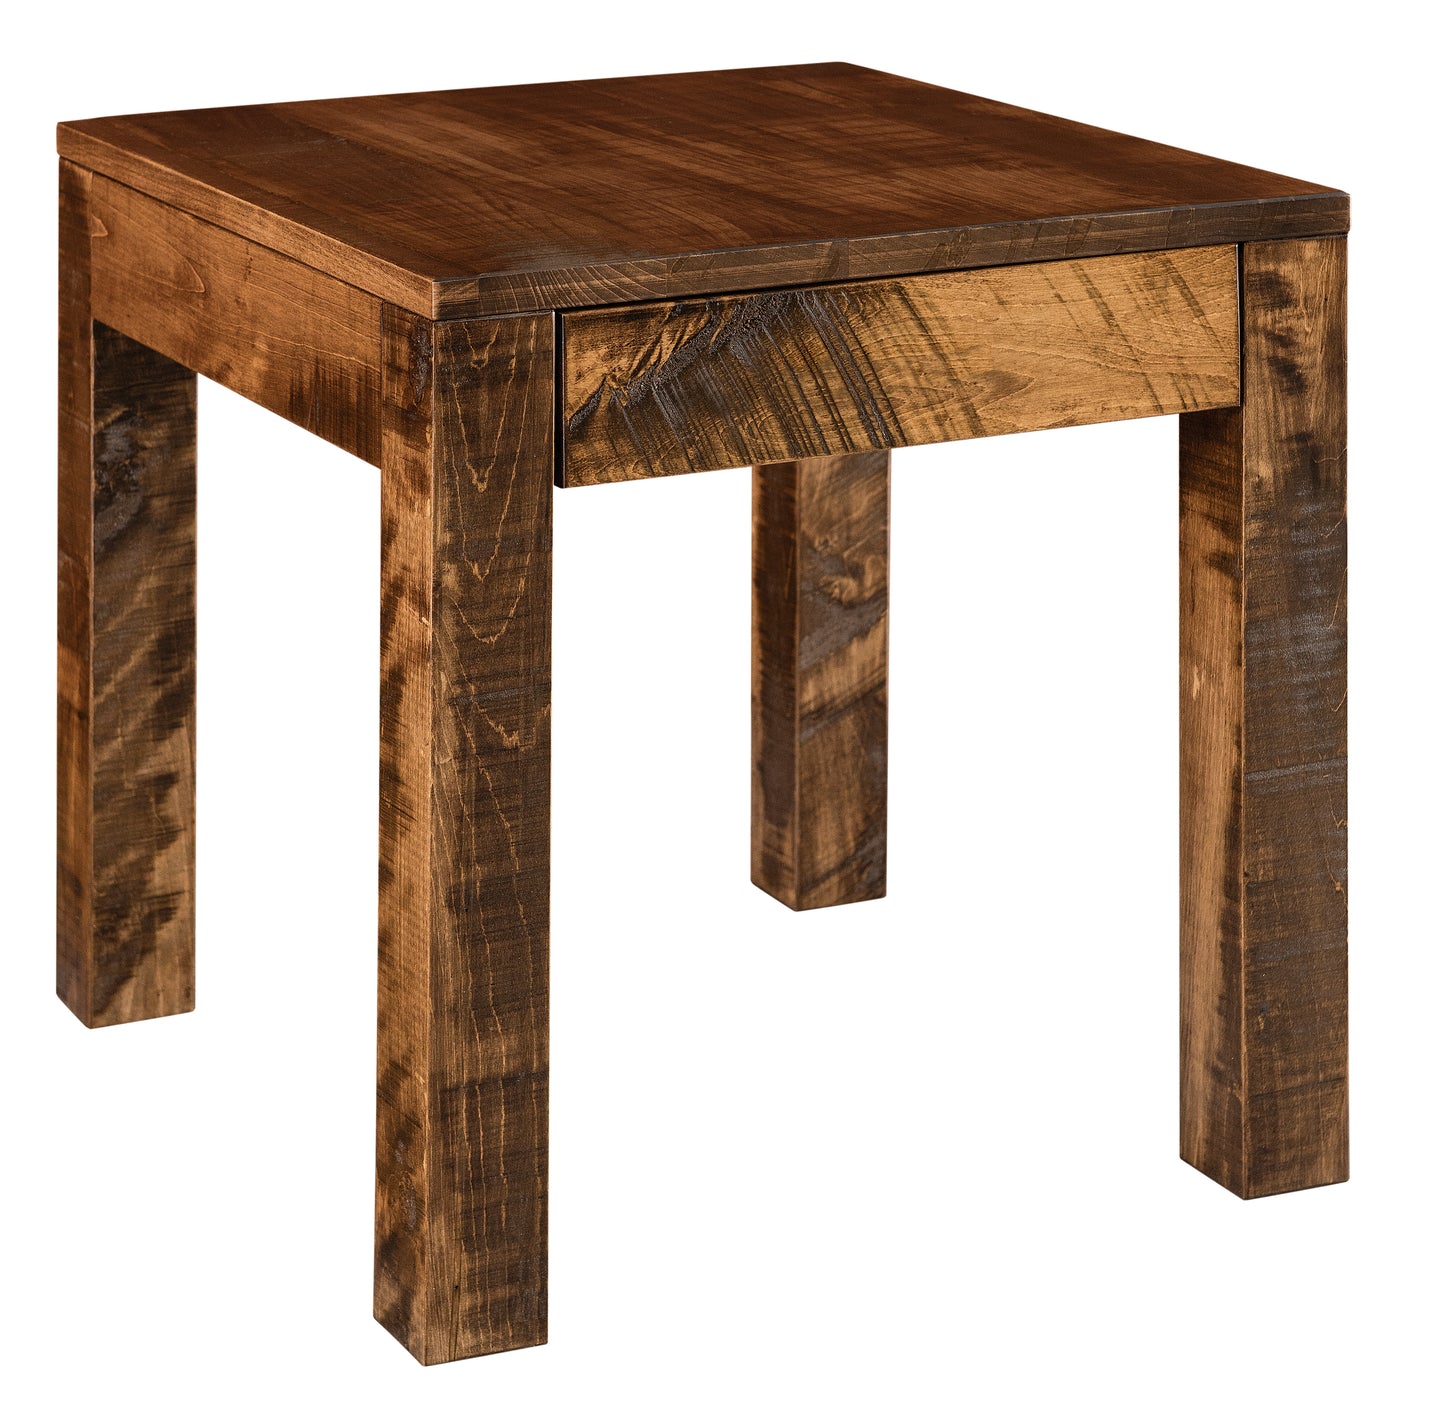 Rockington Roughsawn End Table with Drawer